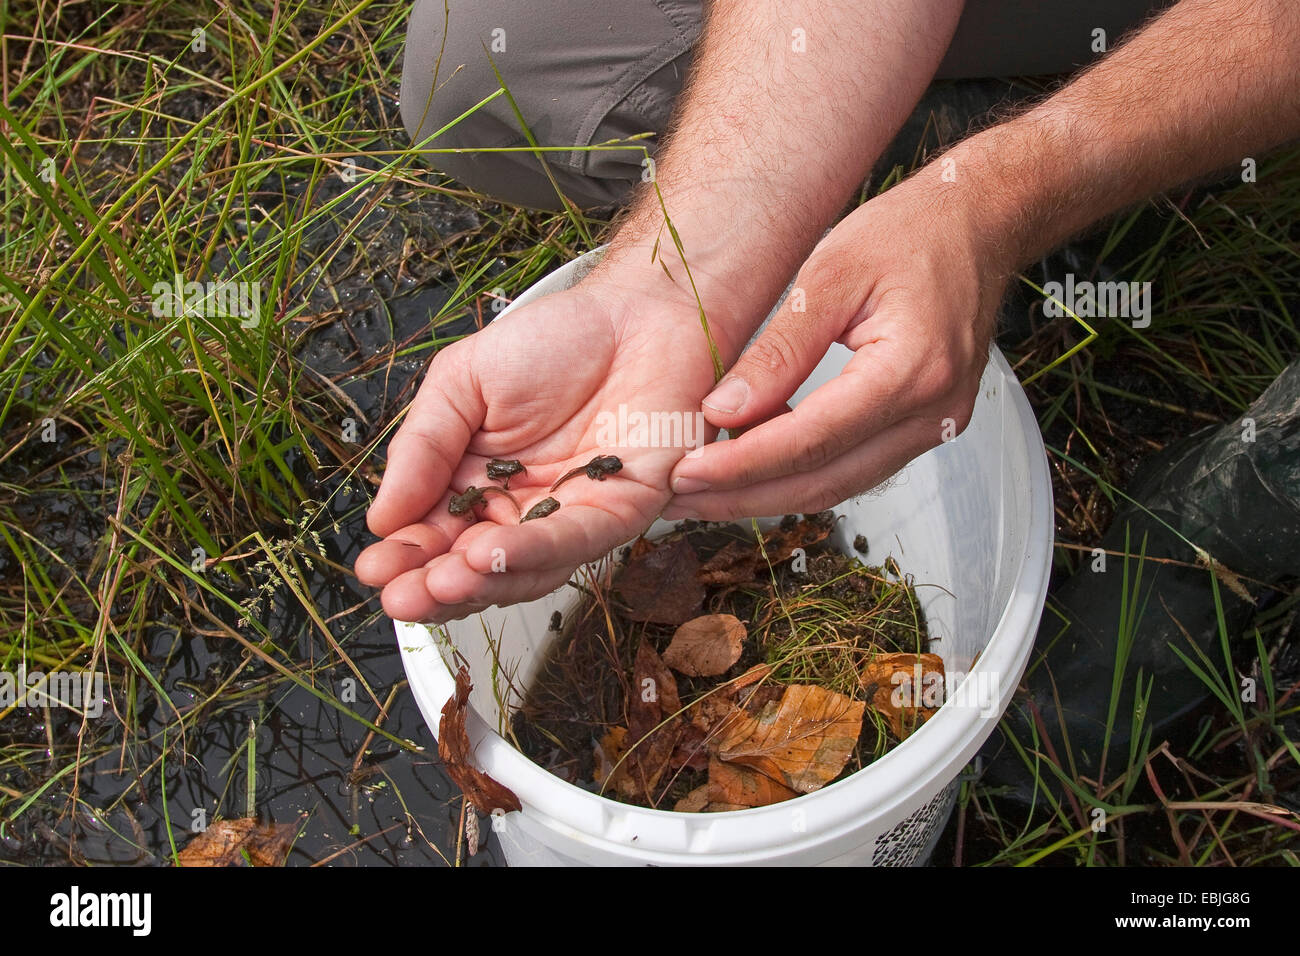 Green toad, Variegated toad (Bufo viridis), young toads being released into a wetland by a biologist as part of an amphibian protection program Stock Photo